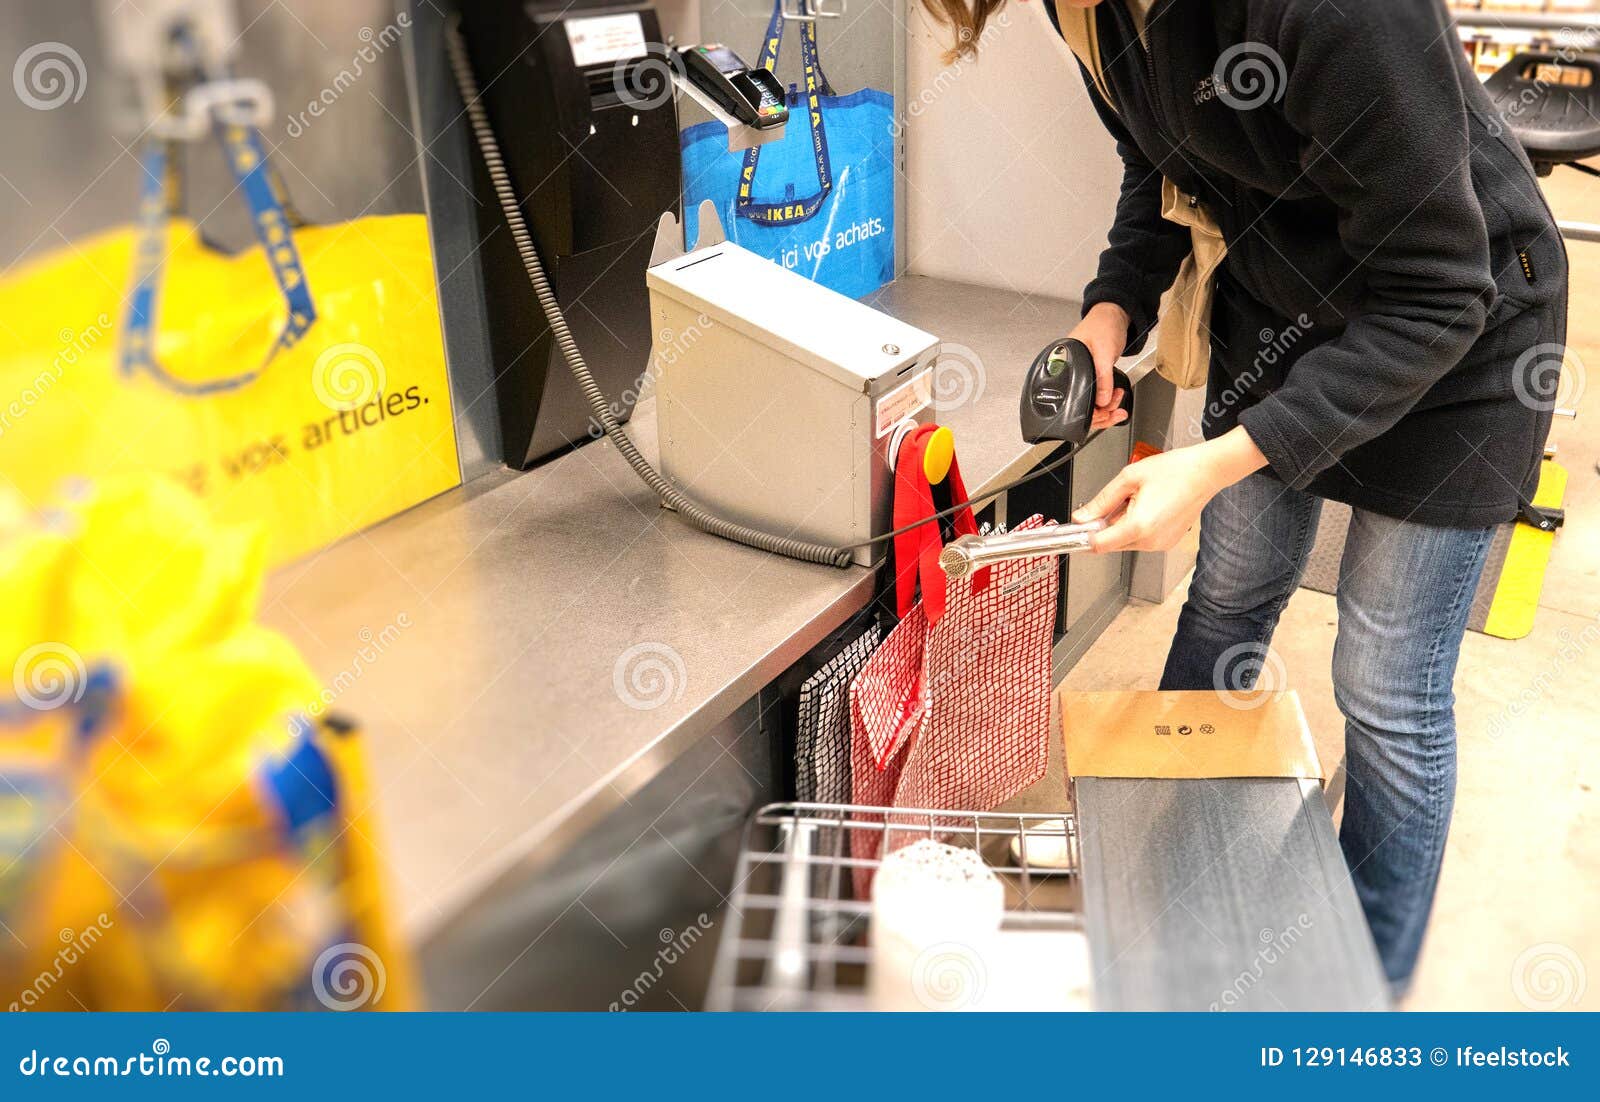 Scanning Products at IKEA Store Shopping Editorial Stock Photo - Image of banking, commercial: 129146833